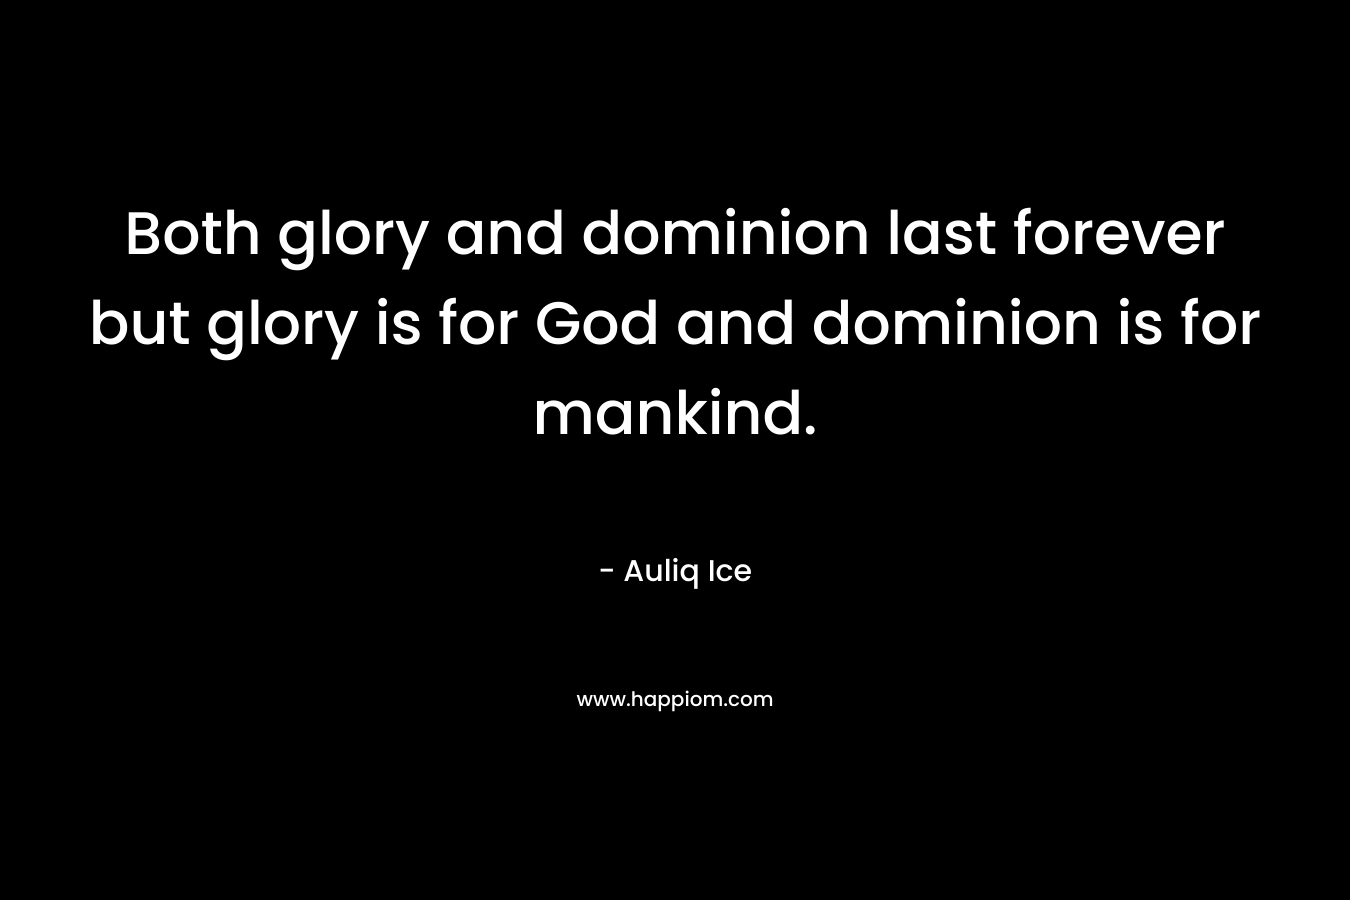 Both glory and dominion last forever but glory is for God and dominion is for mankind. – Auliq Ice